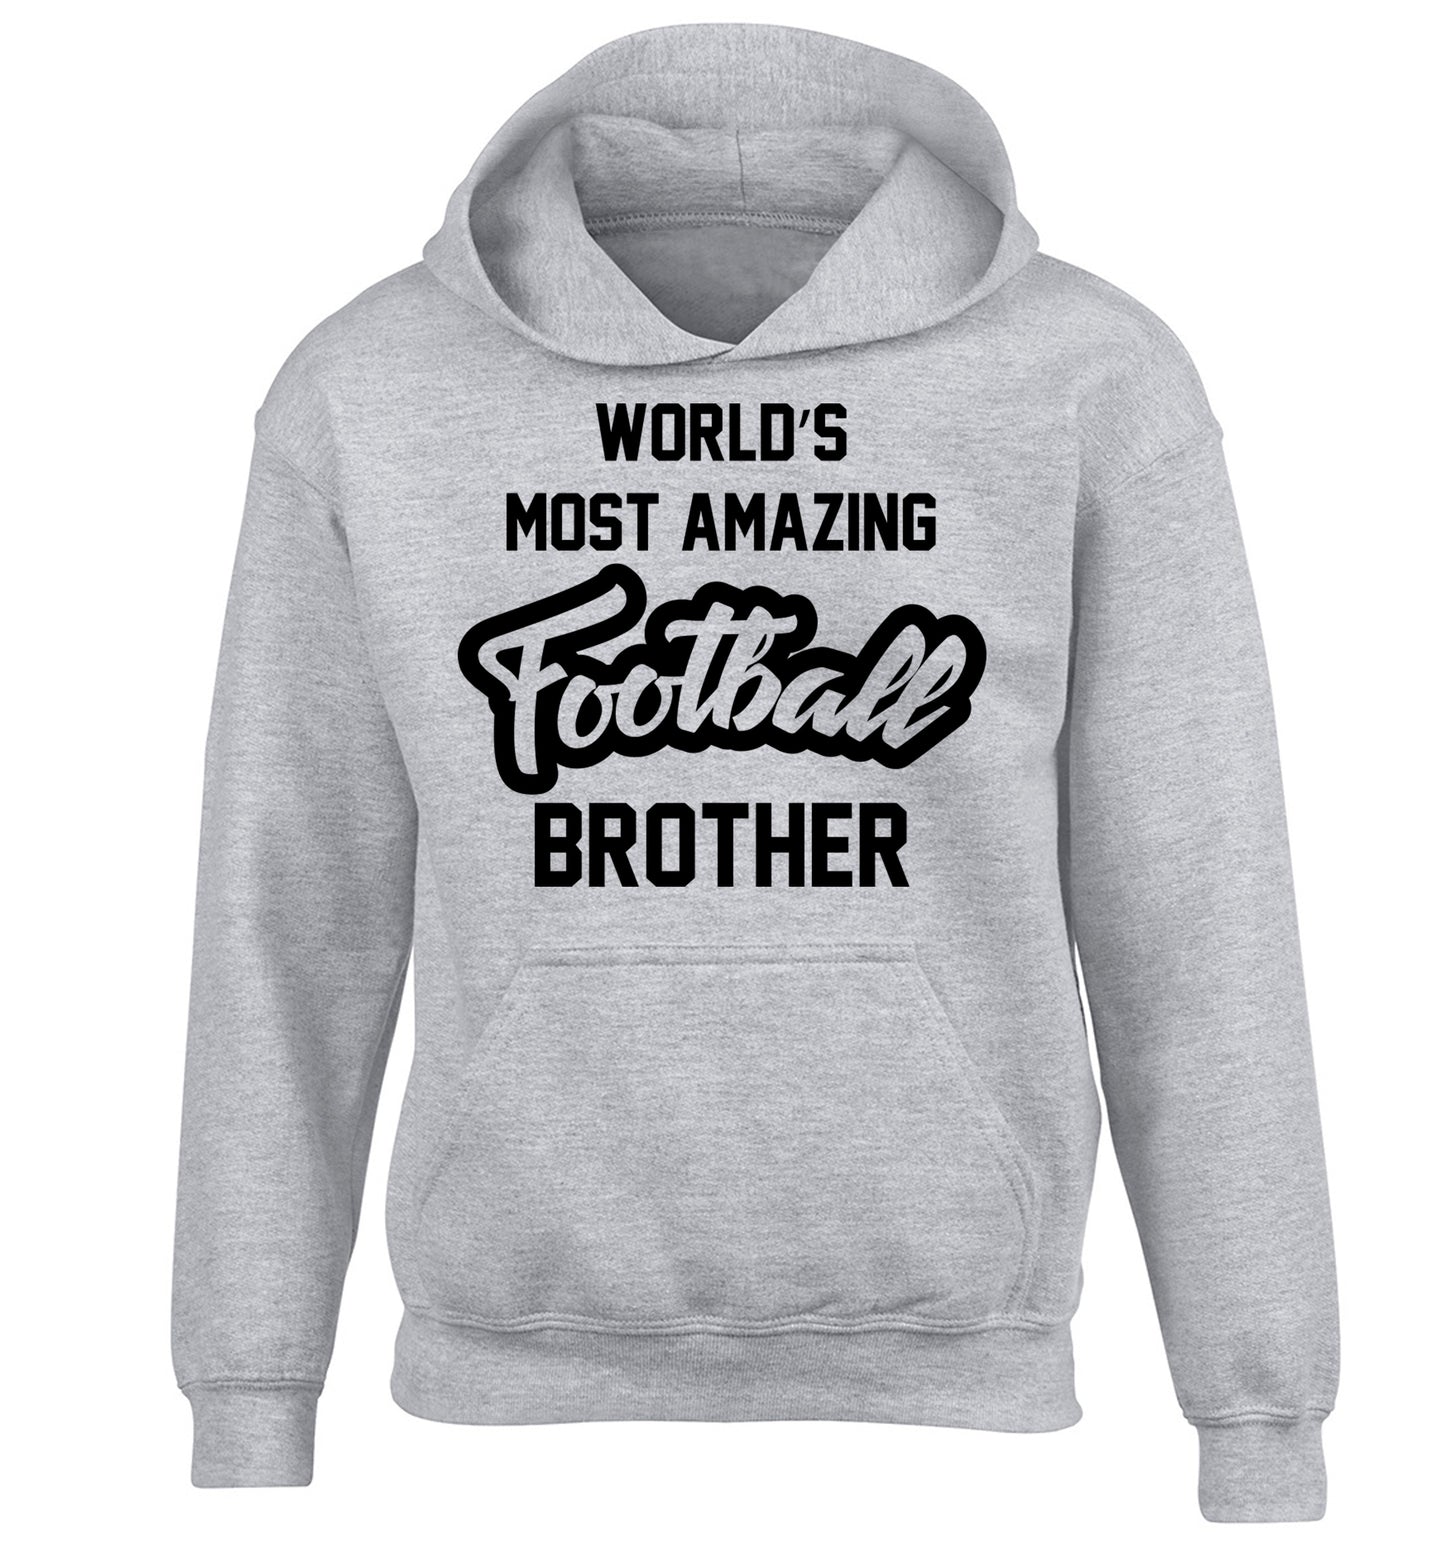 Worlds most amazing football brother children's grey hoodie 12-14 Years